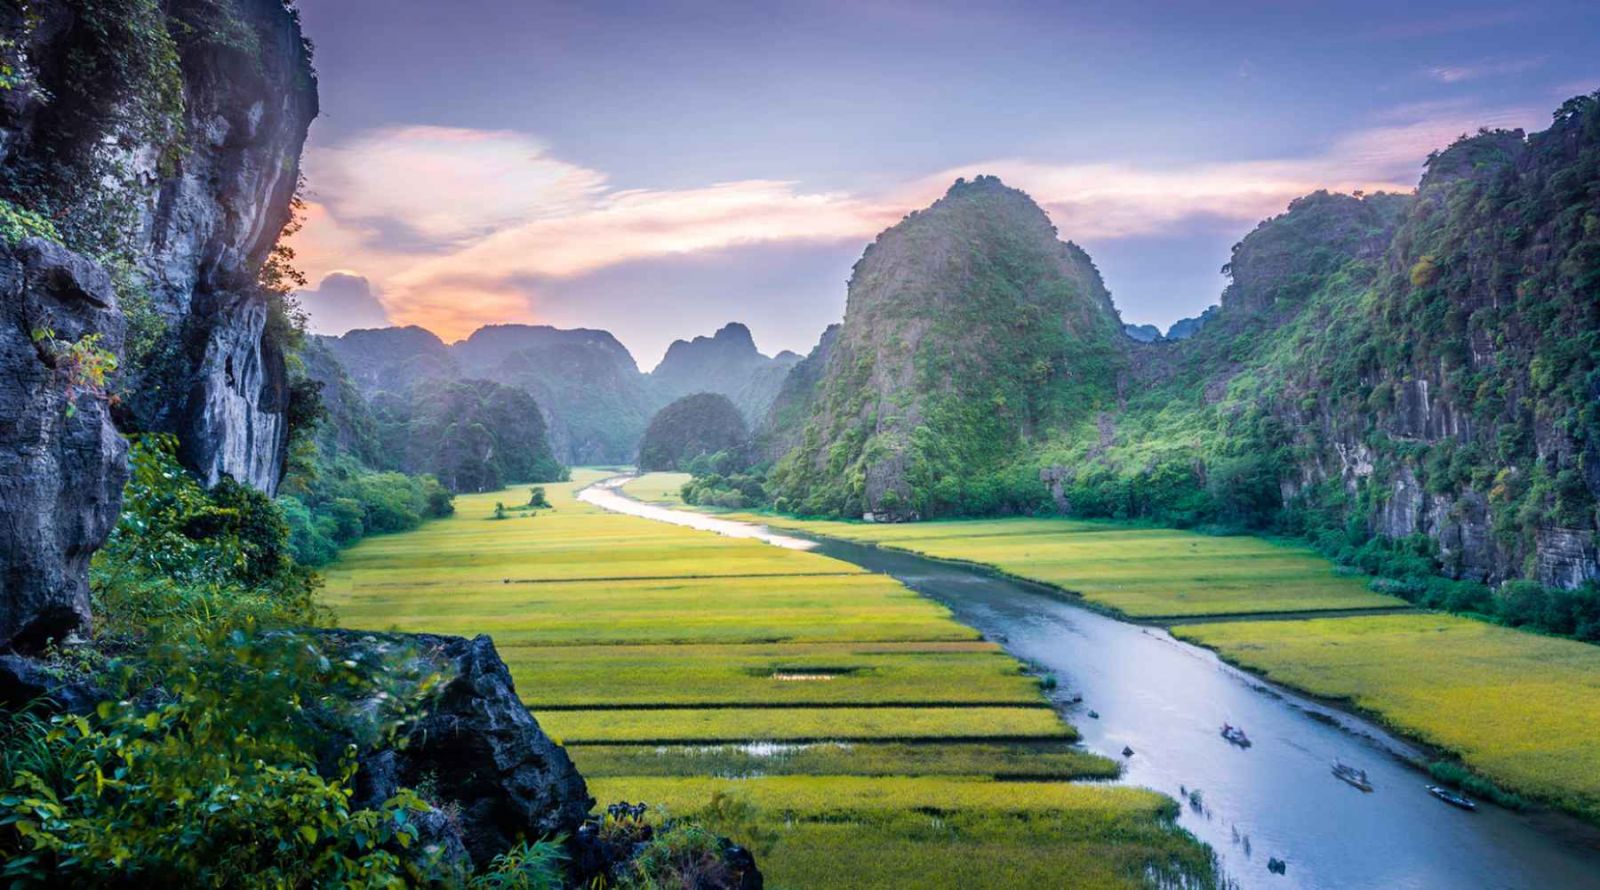 Ninh Binh continues to host the 2021 National Tourism Year